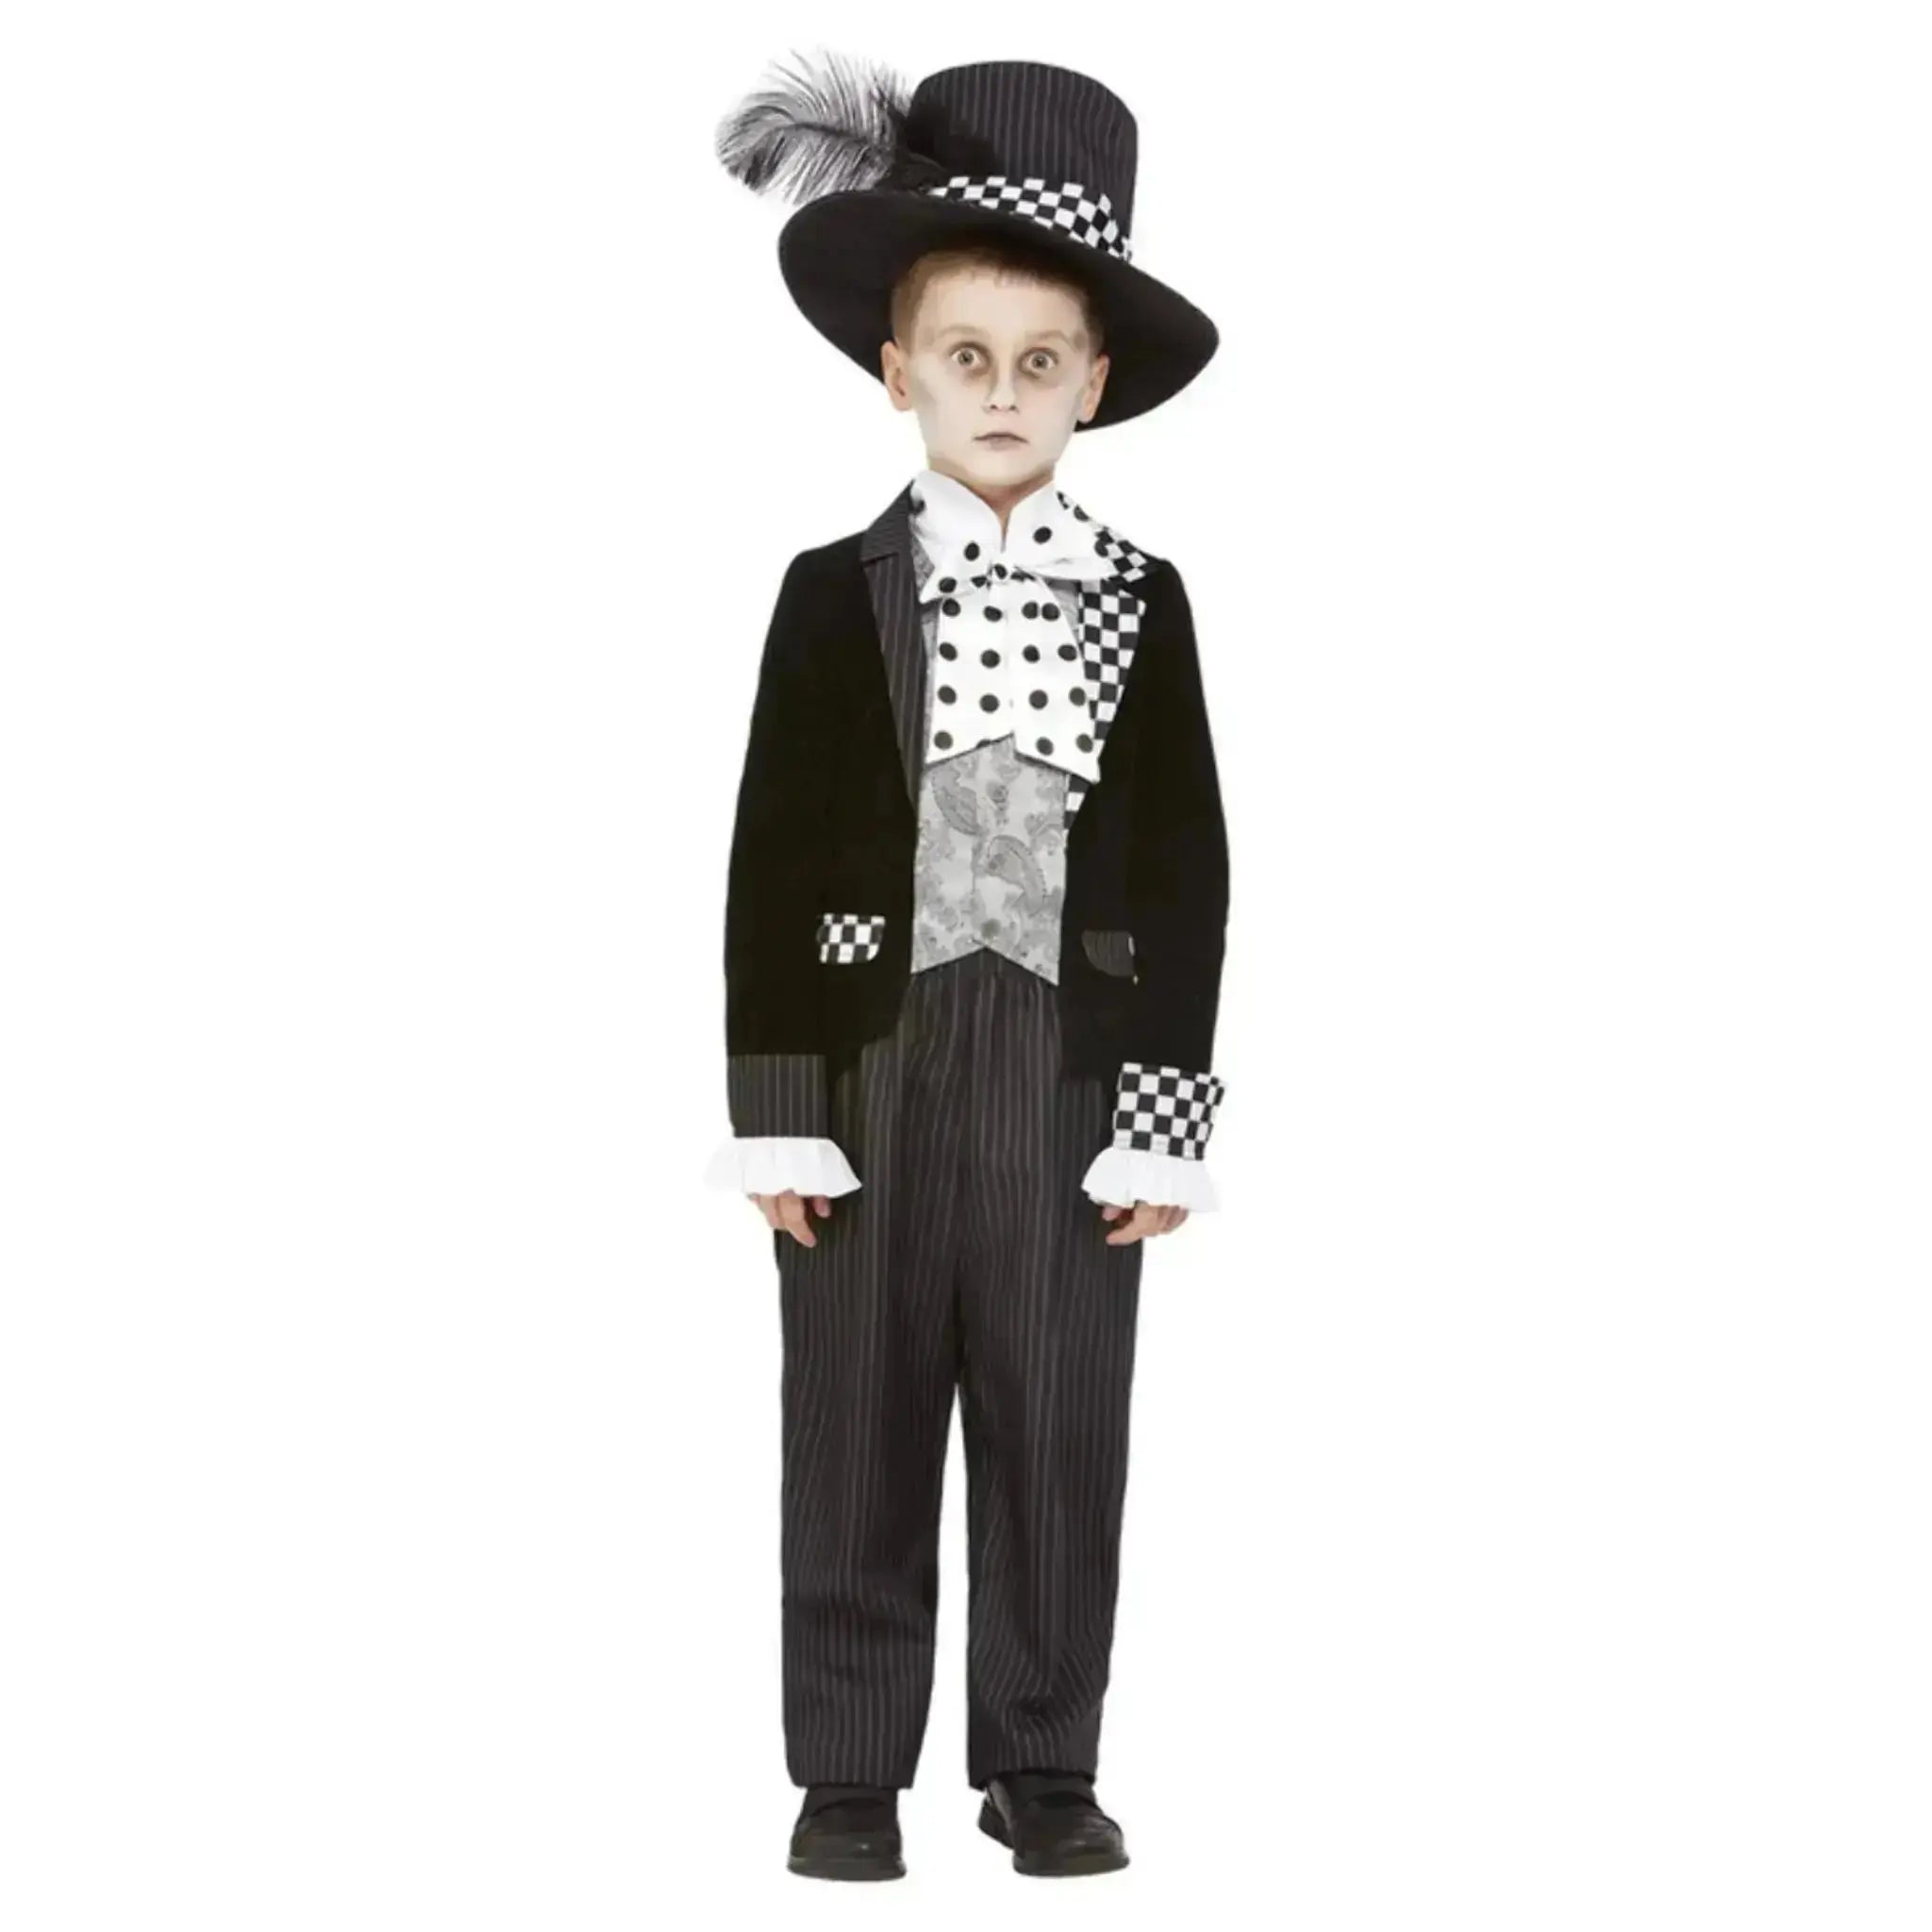 Mad Hatter Costume - Boys | The Party Hut